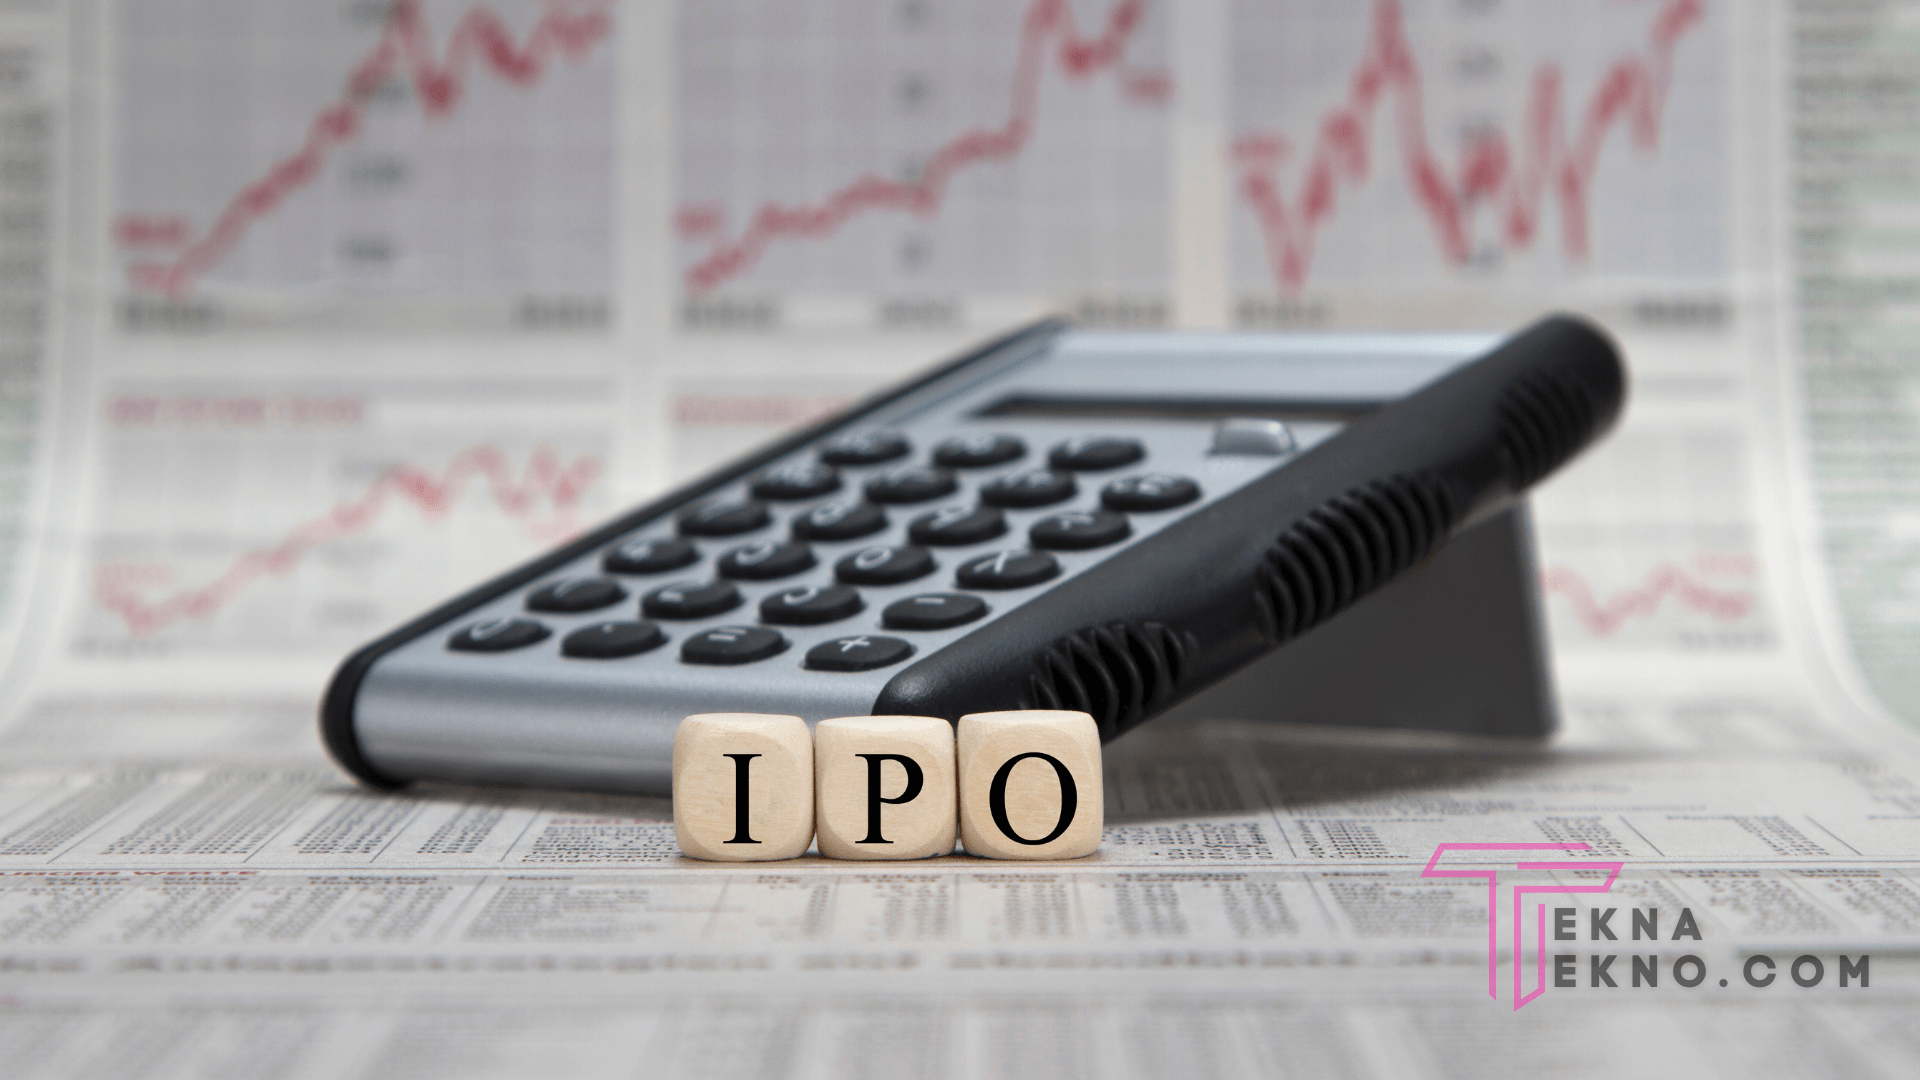 Mengenal IPO (Initial Public Offering)